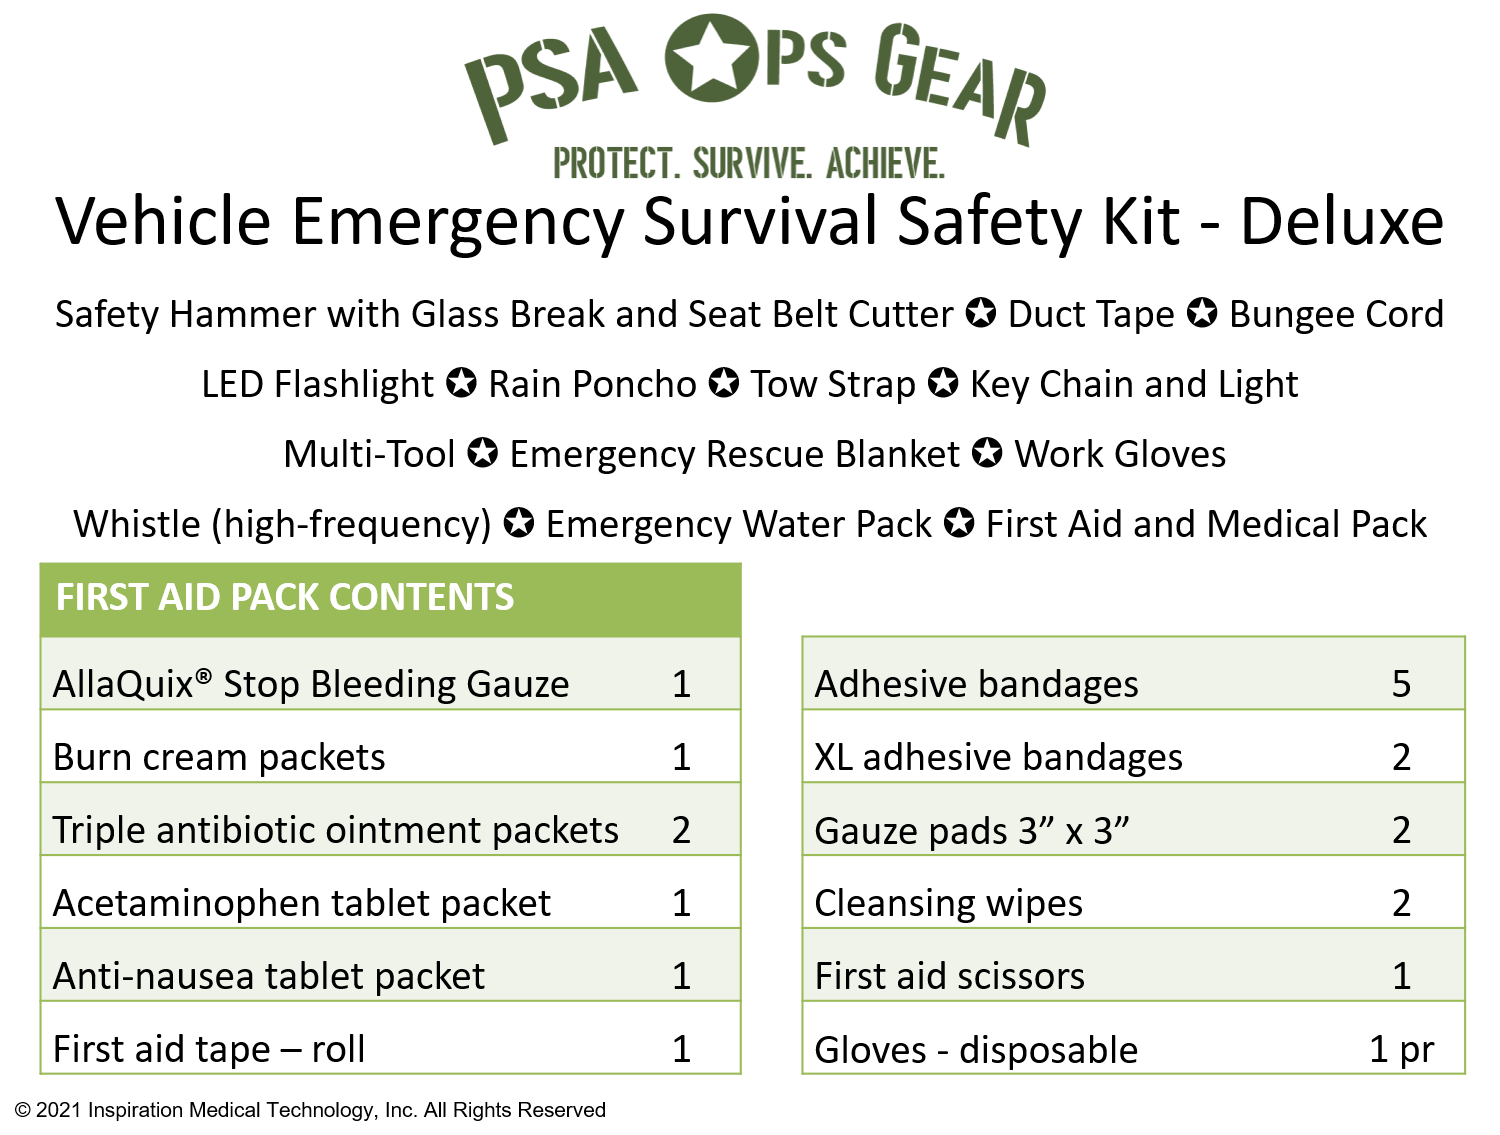 Vehicle Emergency Survival Safety Kit (Deluxe) - Everyday Carry Kit (EDC)  with First Aid Kit